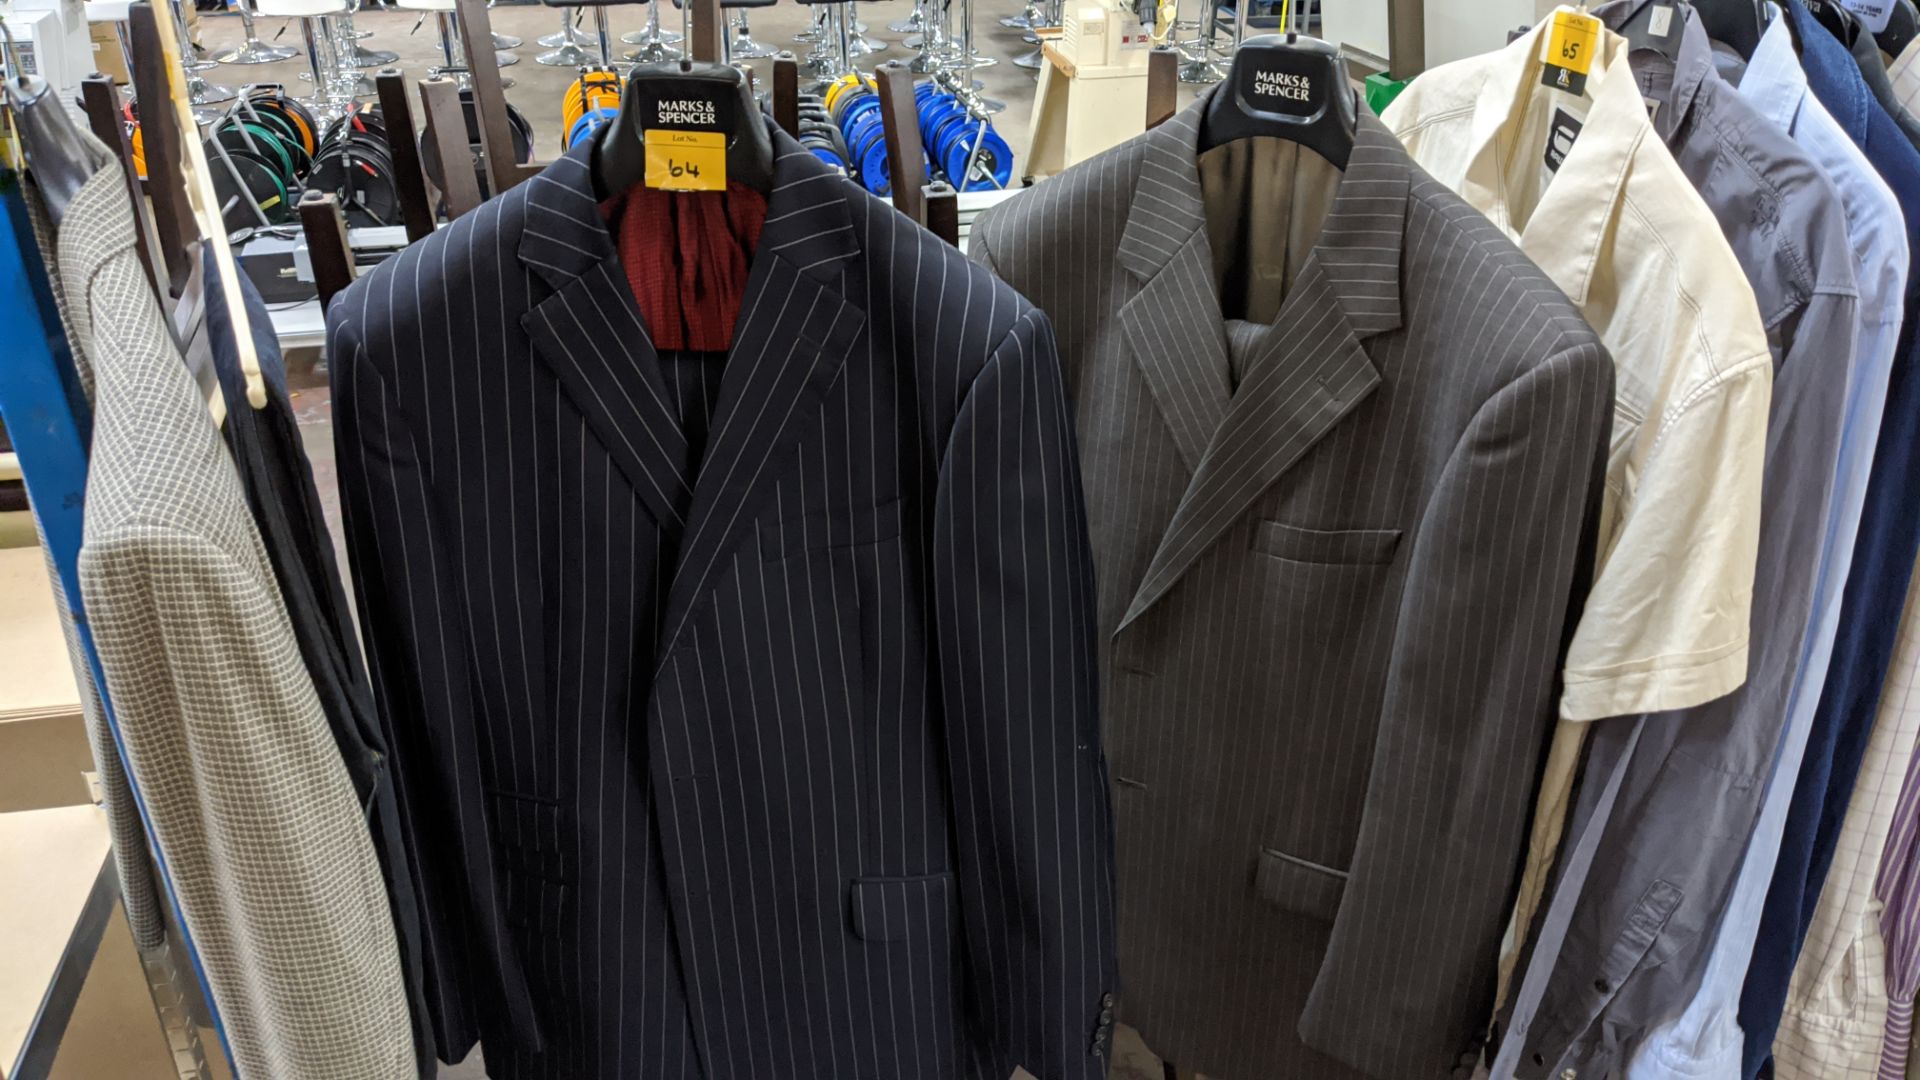 2 off Marks & Spencer men's pure wool suits, sizes 42" and 44" chest, each including 2 pairs of - Image 11 of 11